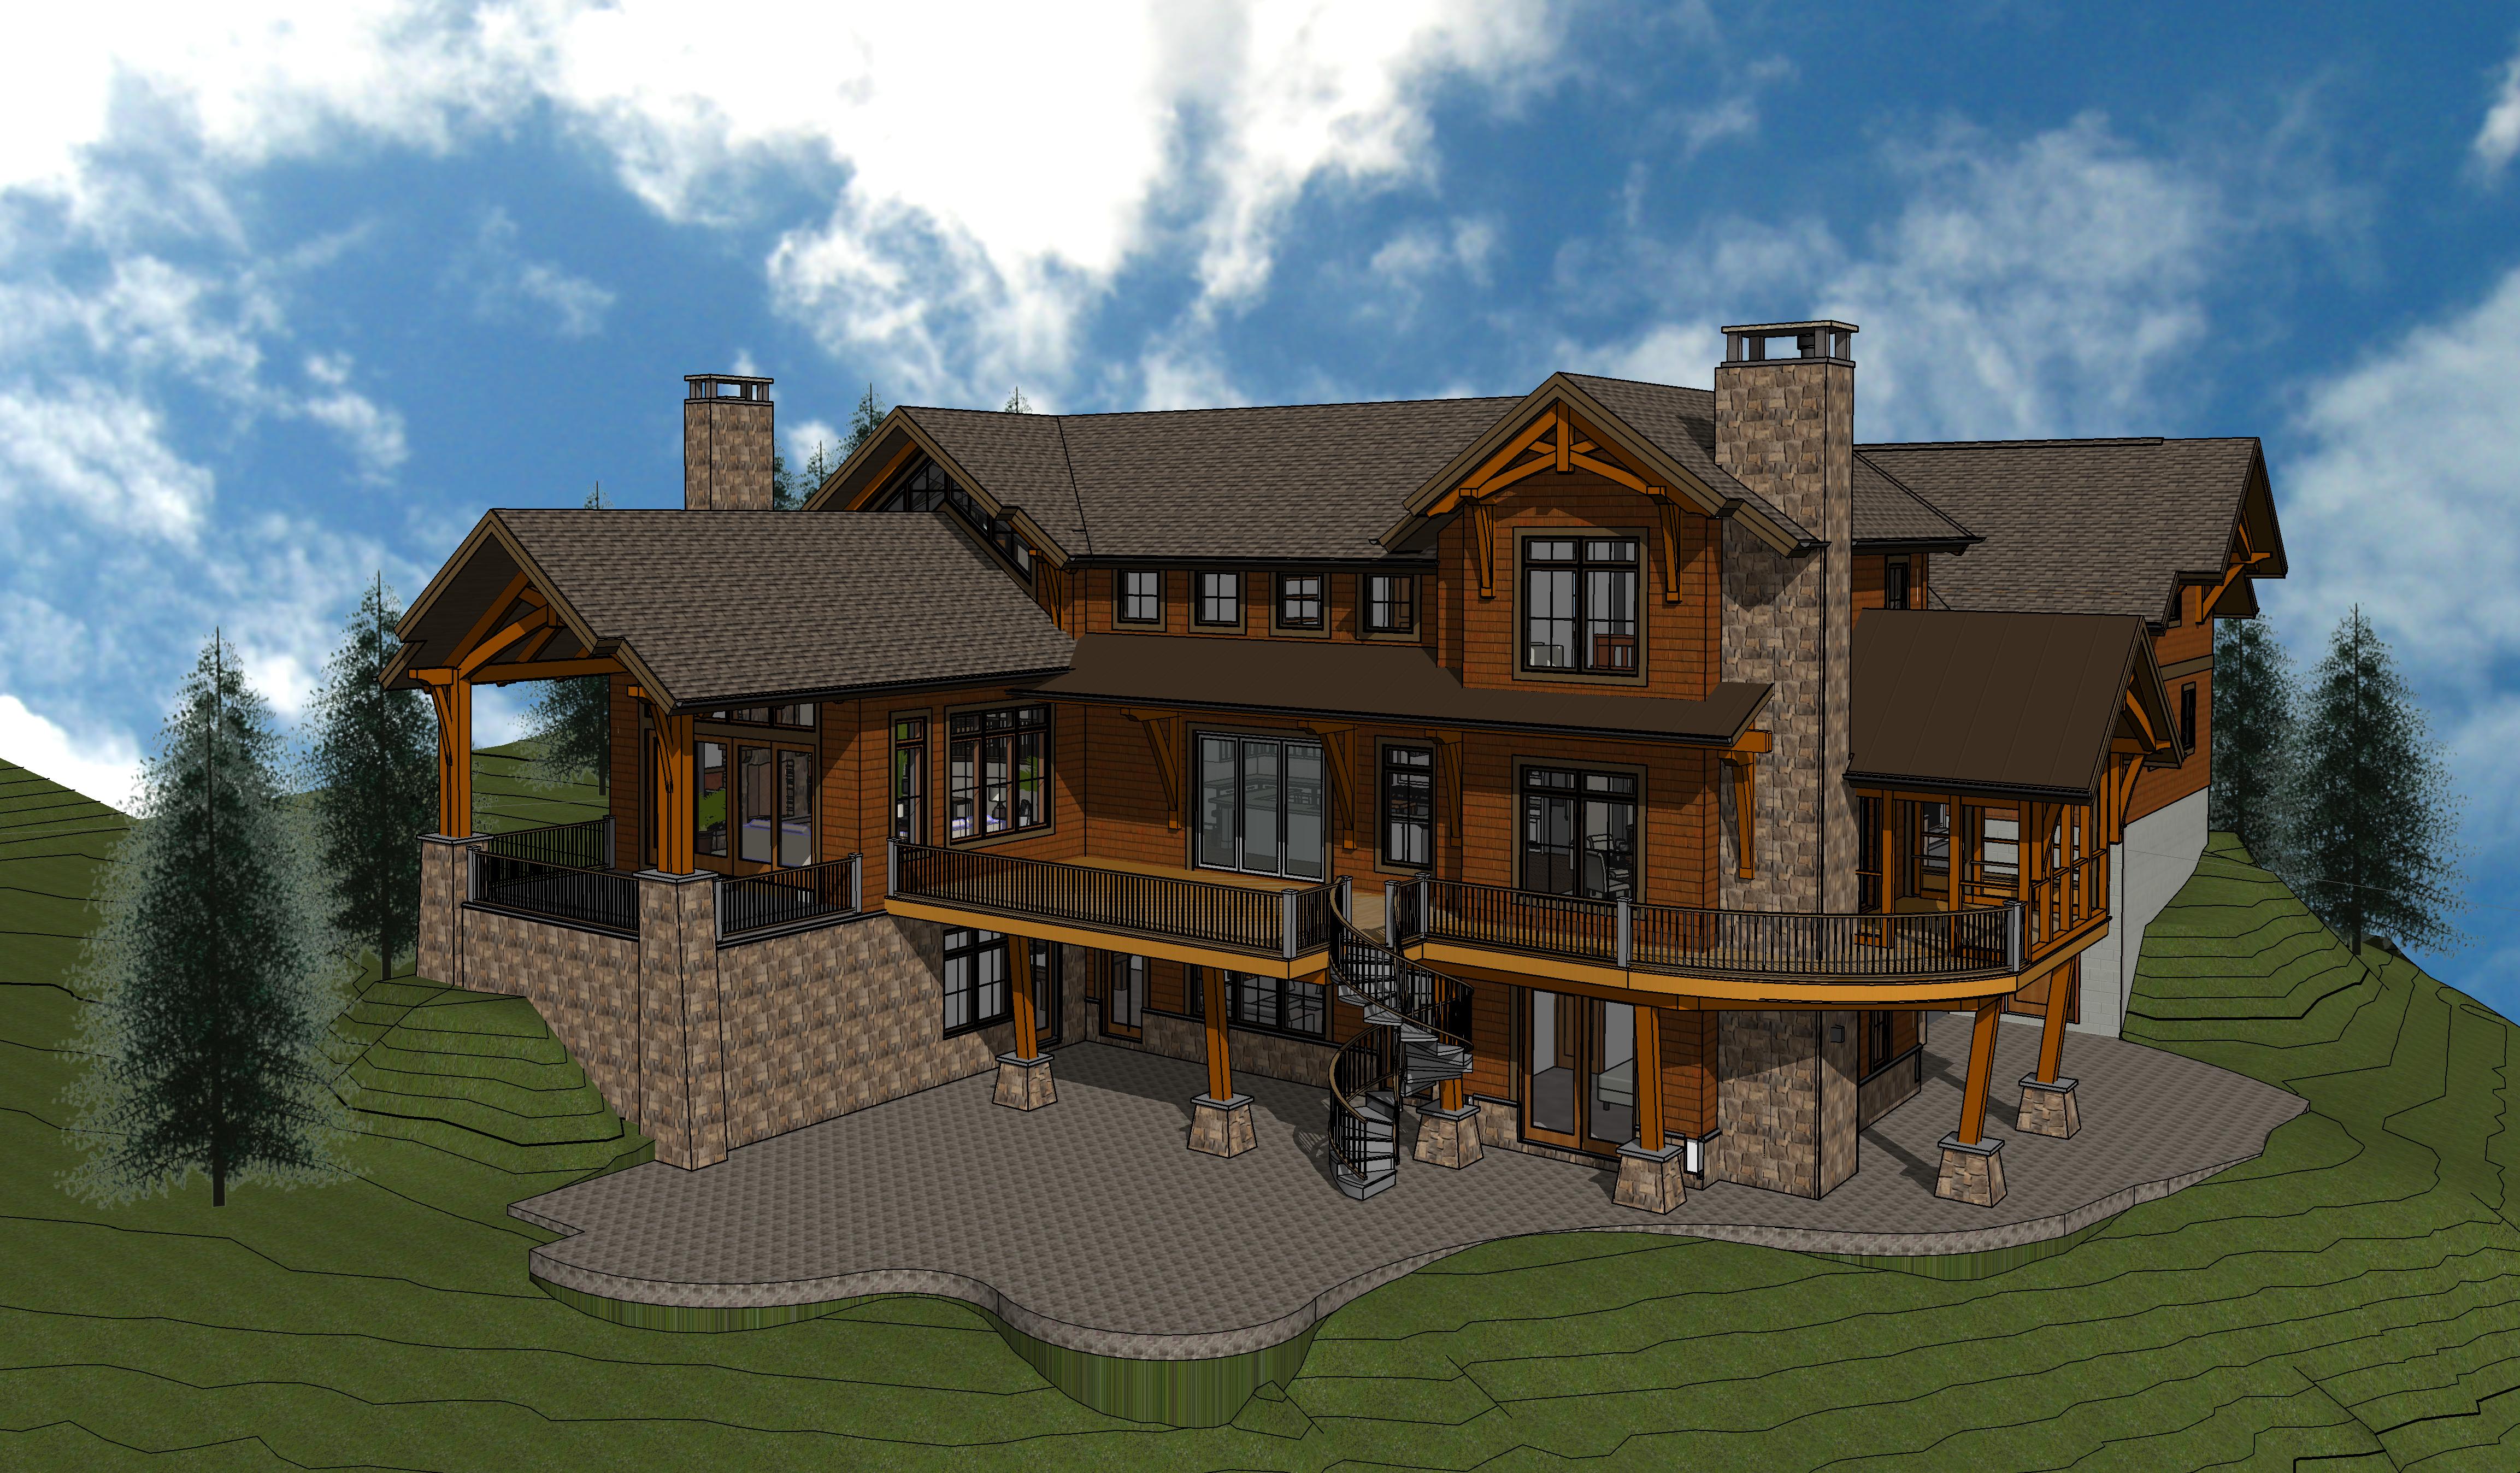 Saturday, July 11 New Energy Works will raise the frame for a Lake Home project overlooking Cayuga Lake in Ithaca, NY.